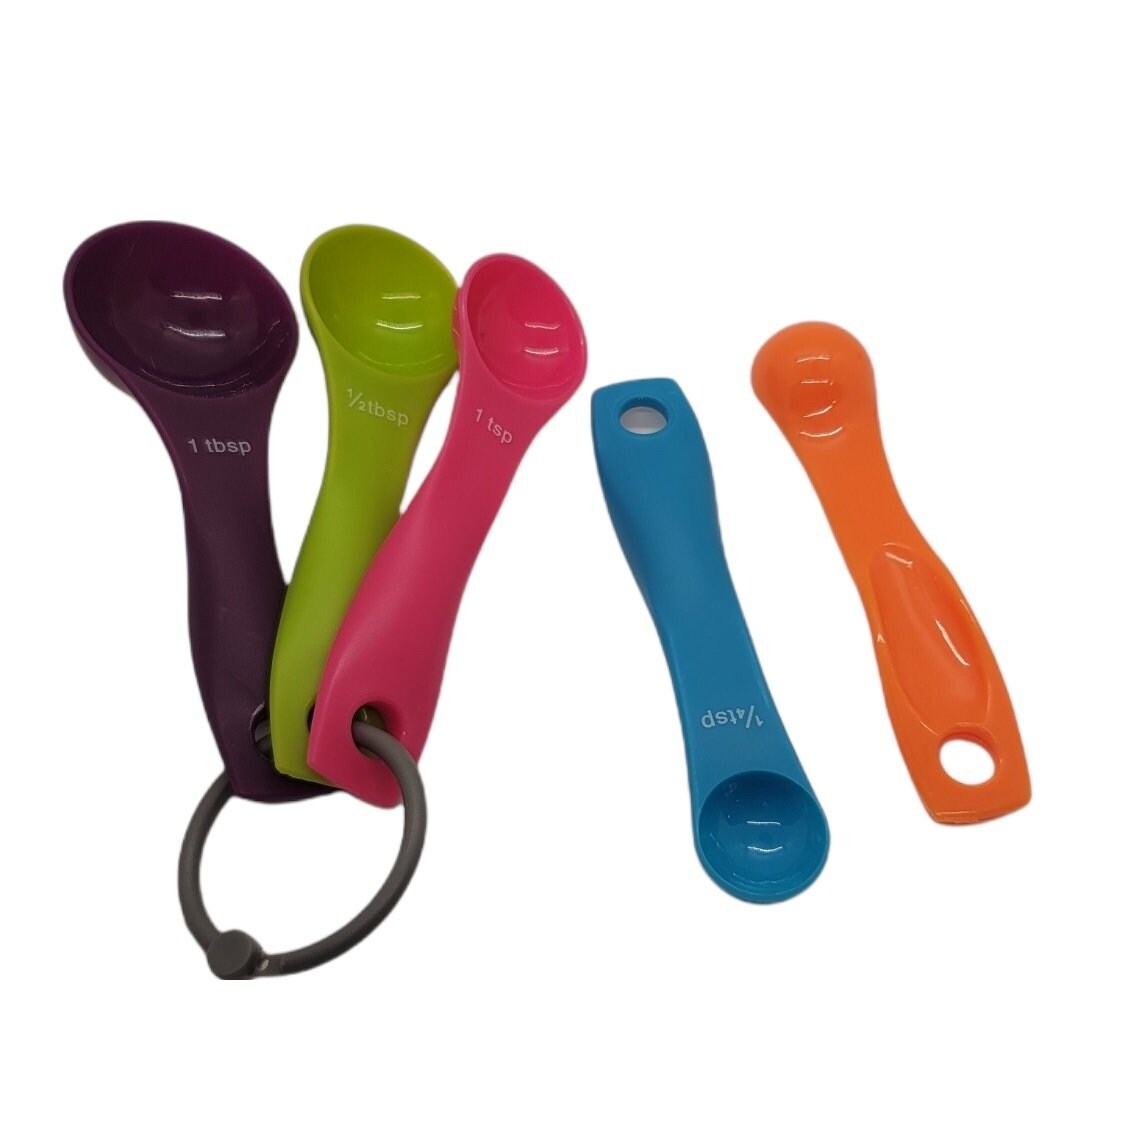 https://ak1.ostkcdn.com/images/products/is/images/direct/4f21362b200e199116deb63e69d2476944d2ad45/5-Piece-Colorful-Plastic-Nesting-Measuring-Spoon-Set---1-4-tsp-to-1-tbsp-for-Dry-or-Liquid-Ingredients.jpg